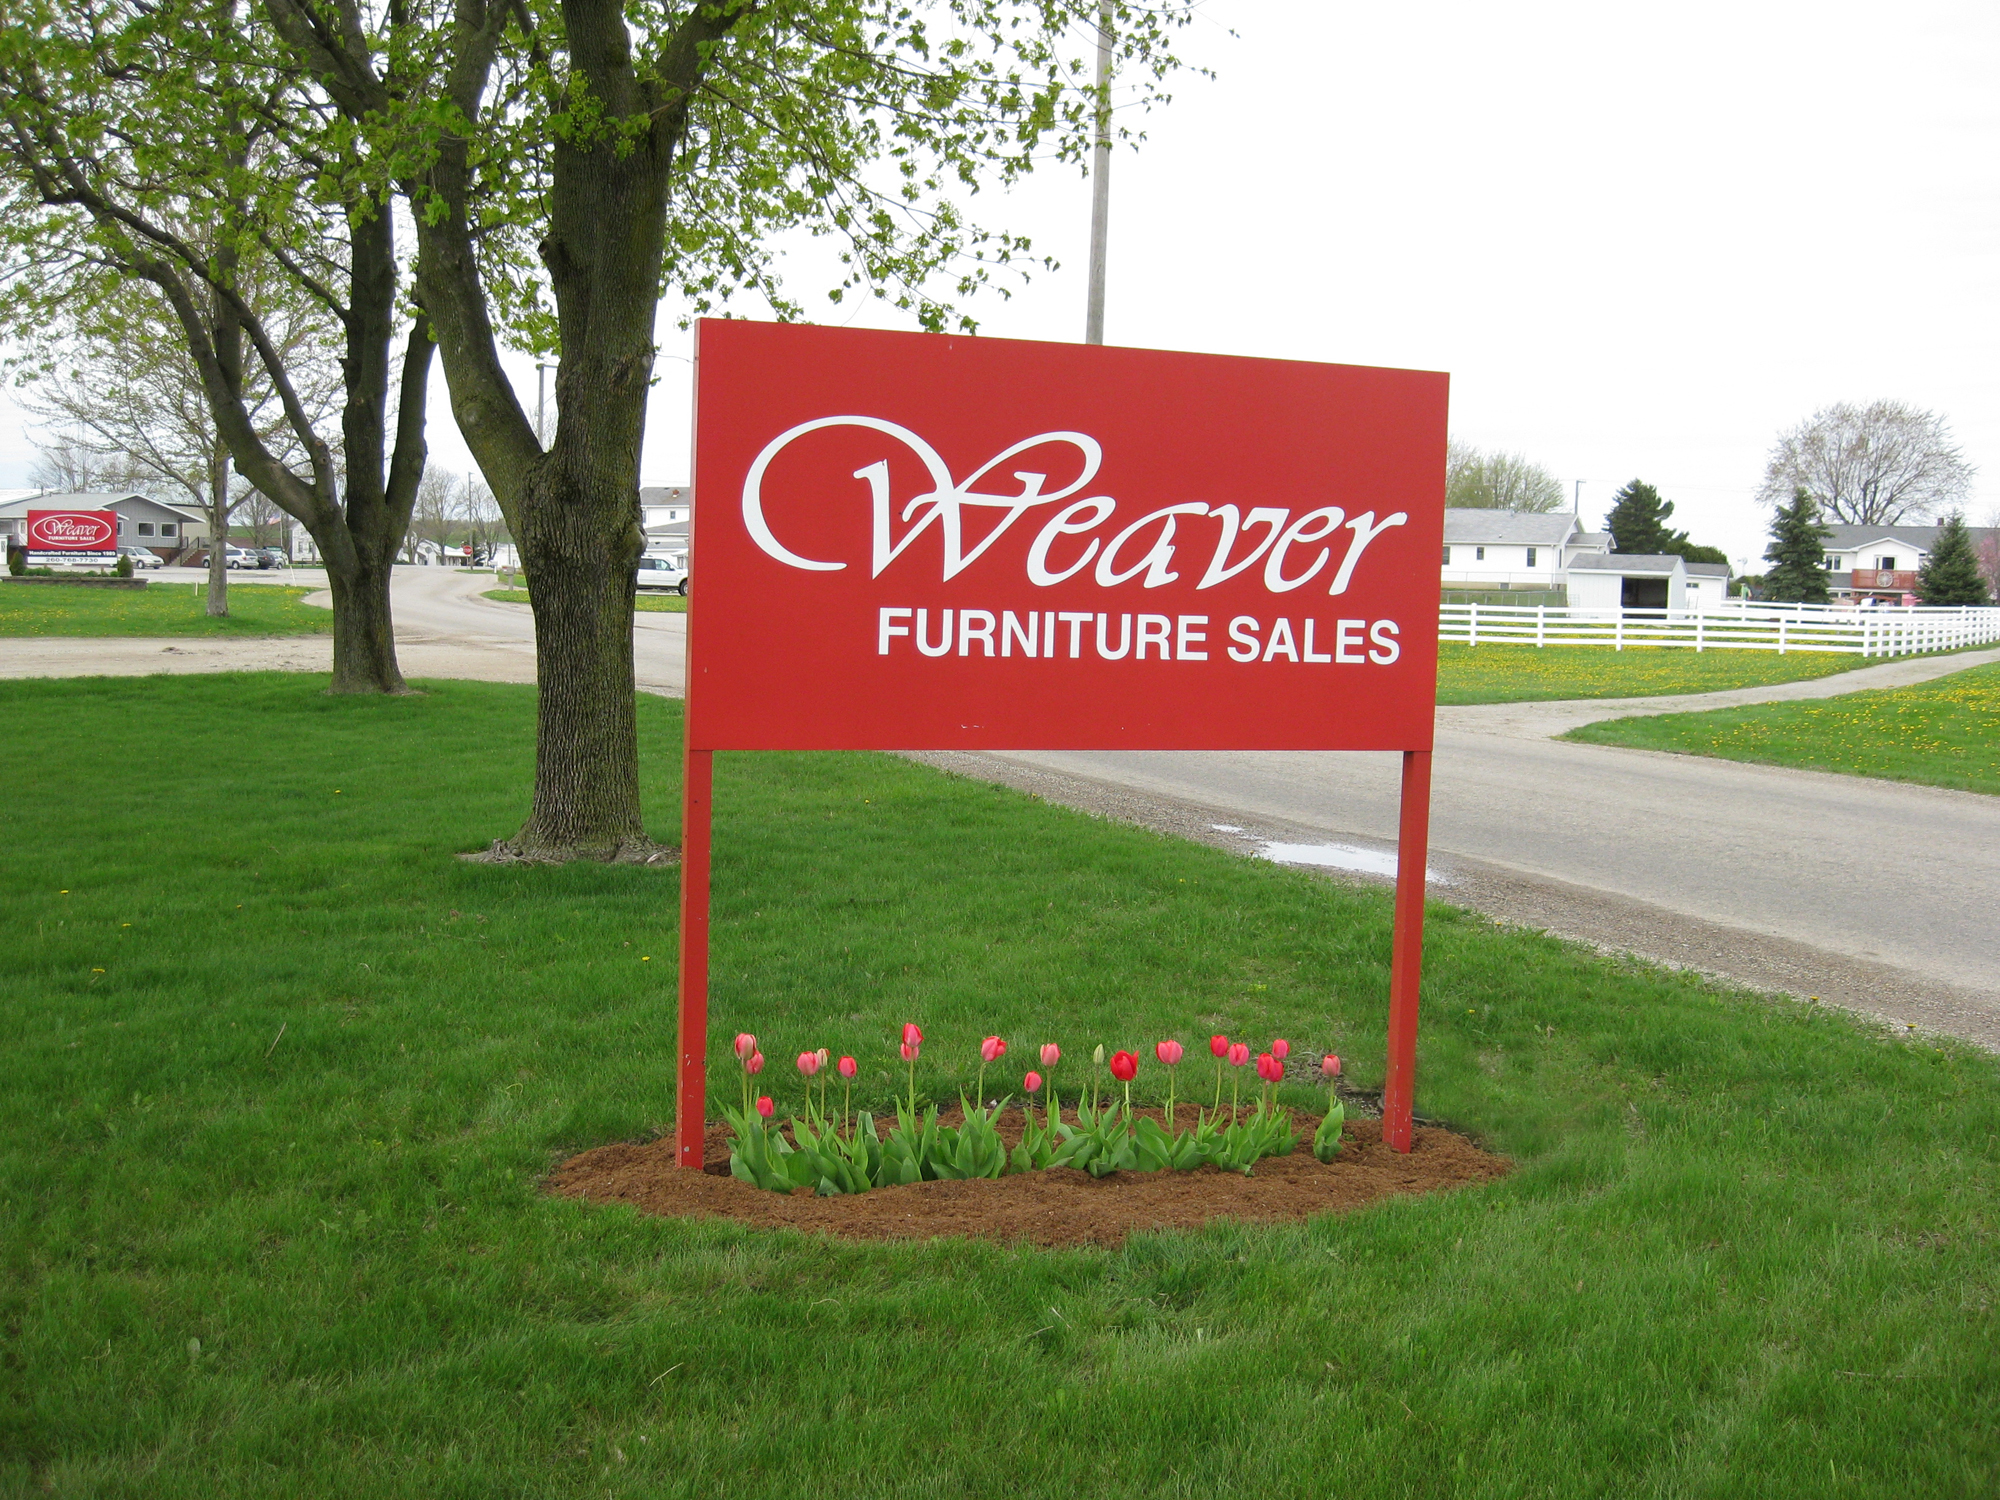 Weaver Furniture Sales And Shipshewana Community Welcome Visitors